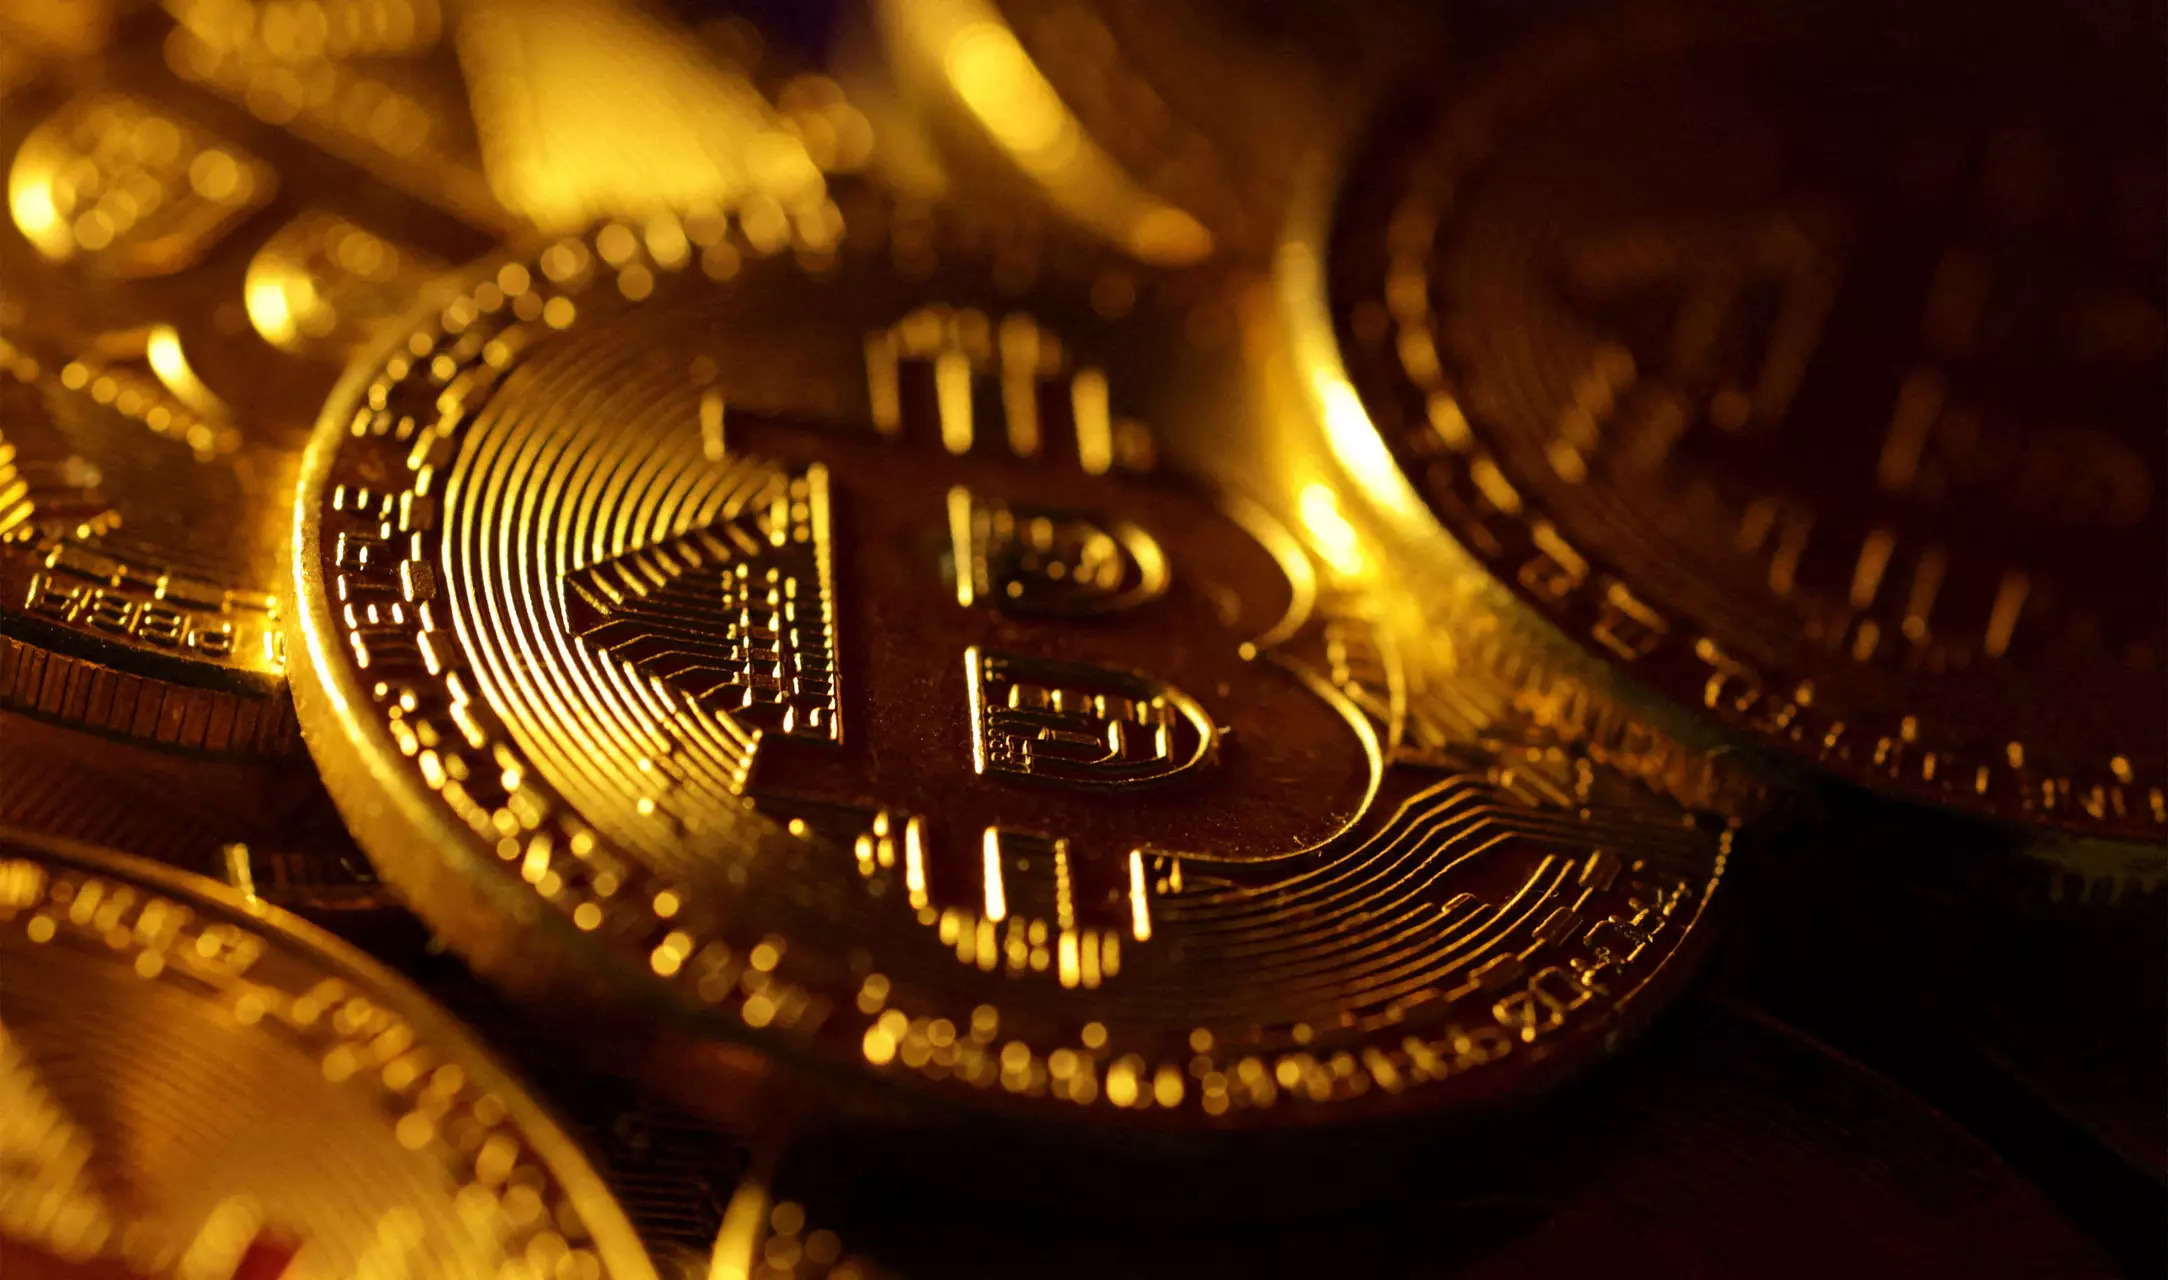 Bitcoin's latest 'halving' has arrived. Here's what you need to know